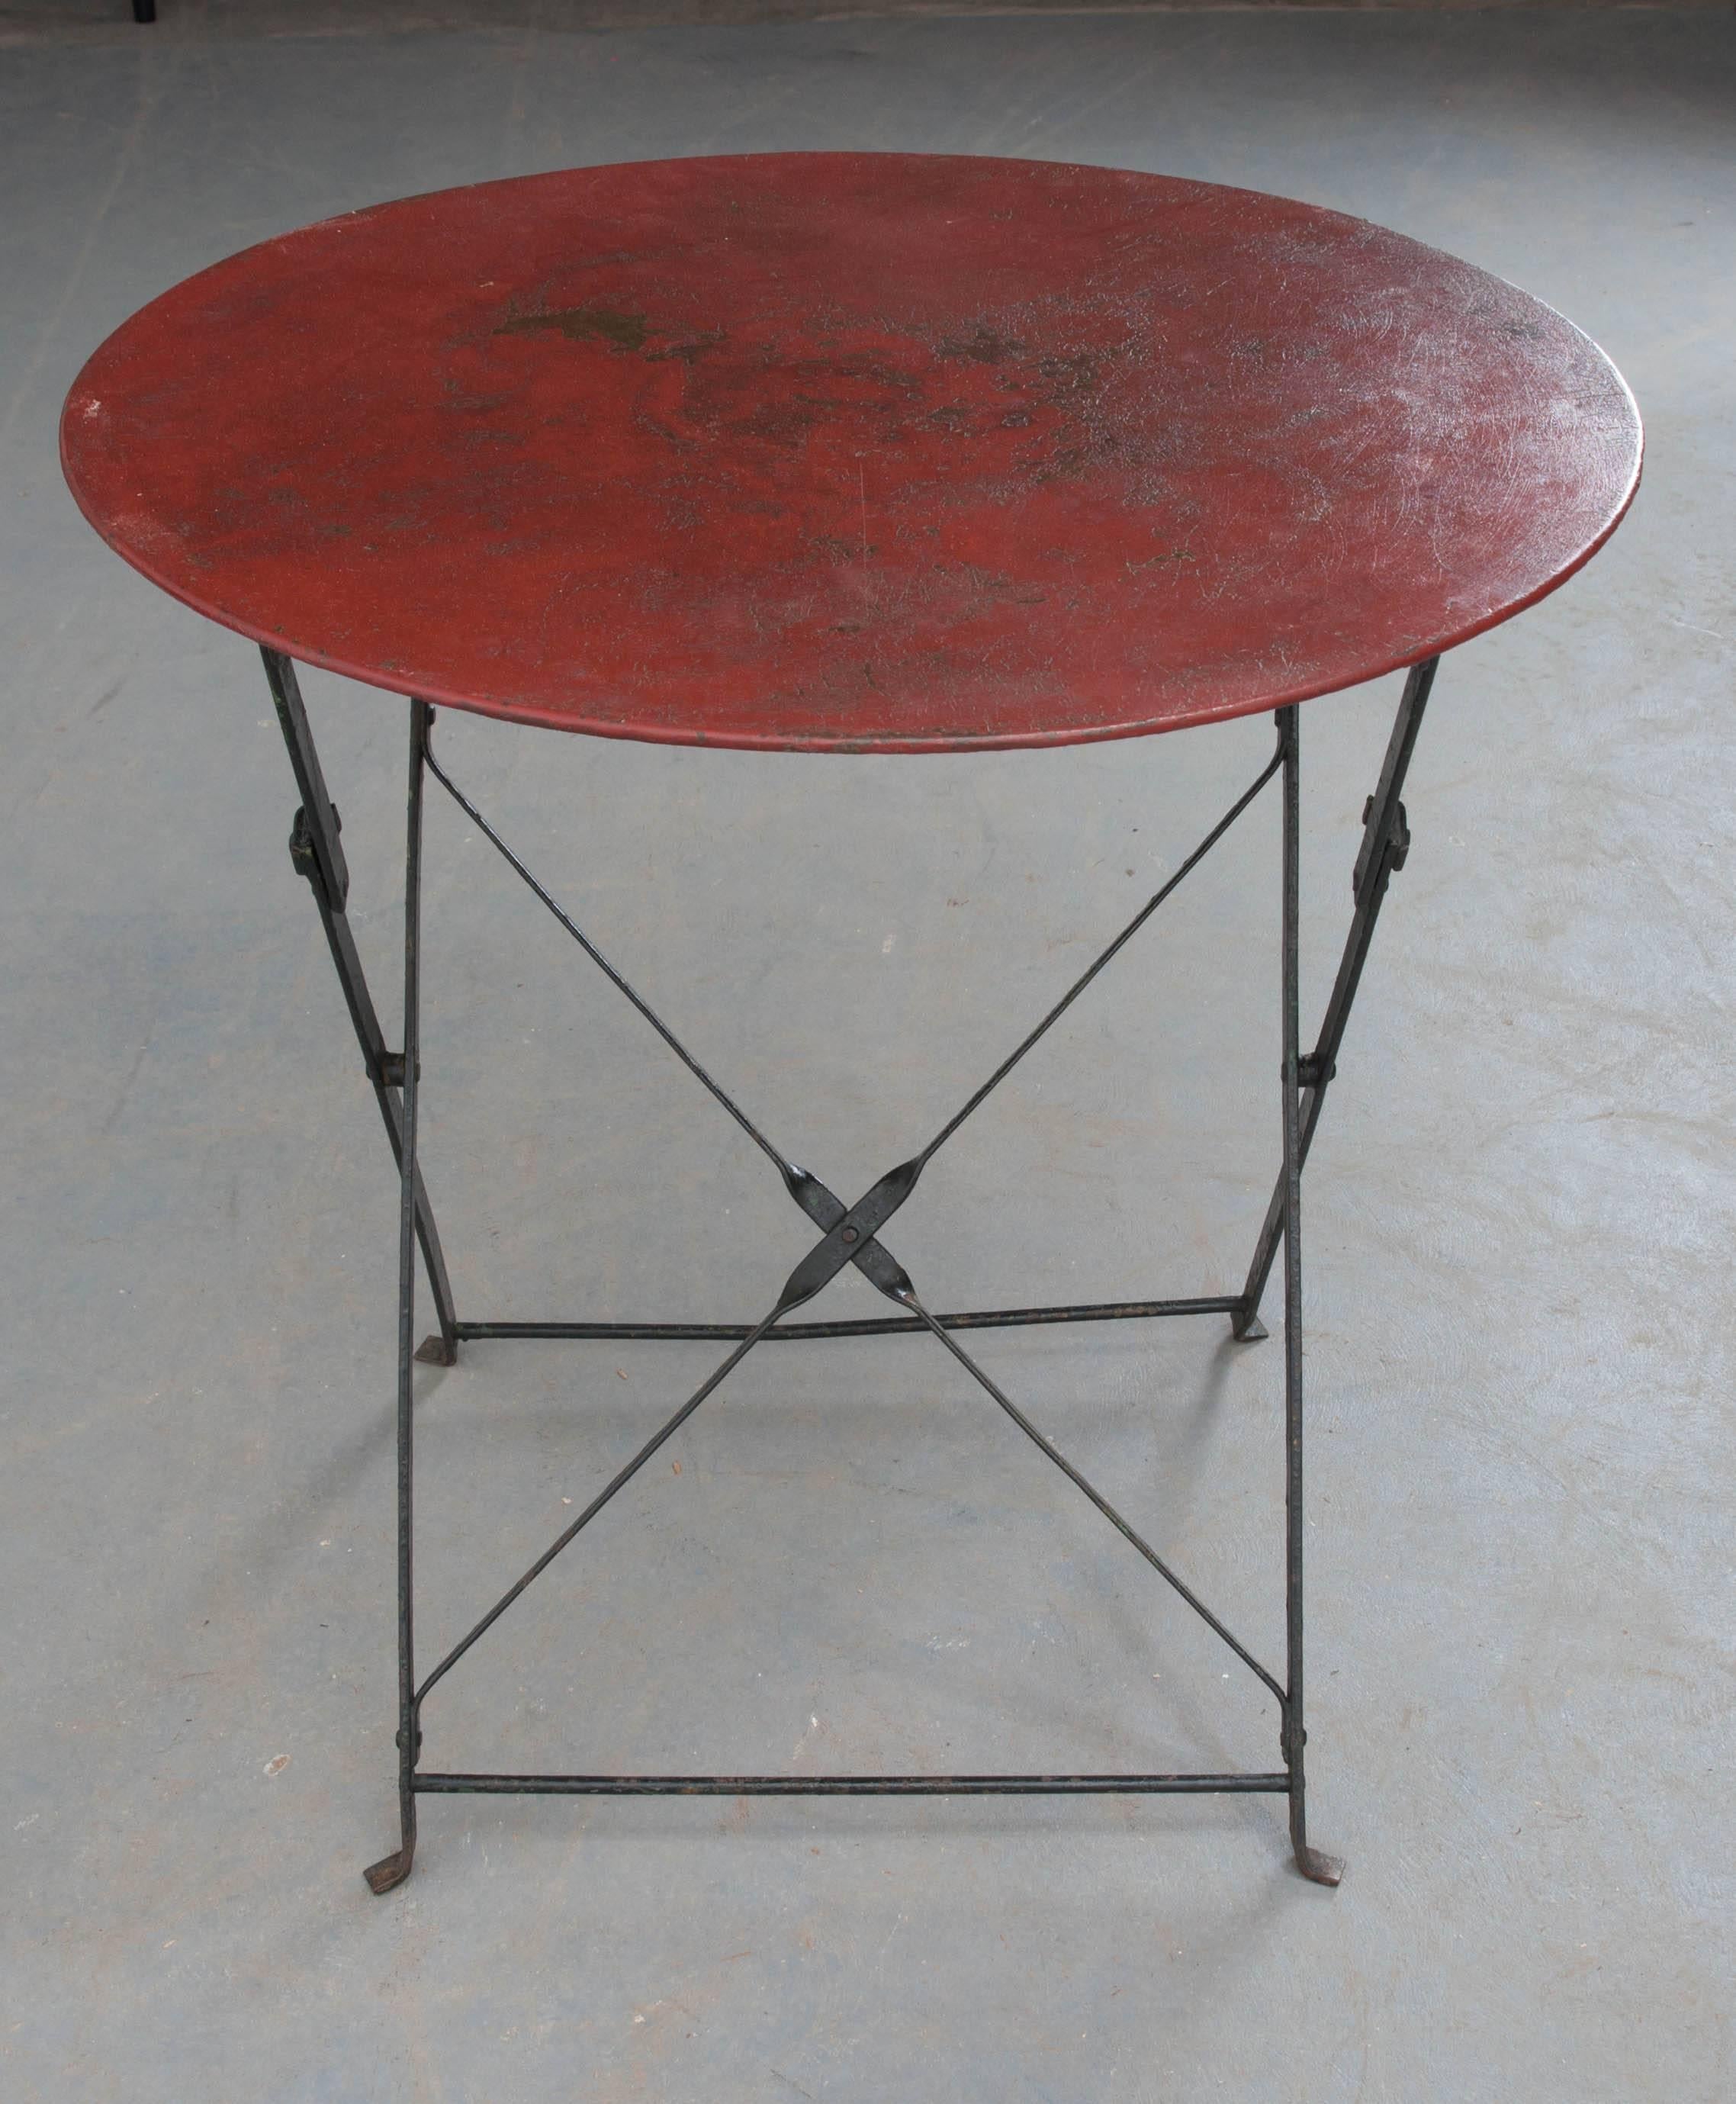 An excellent round, folding metal garden table from England, circa 1920. The red painted top makes quite a statement for this fun outdoor antique. With the ability to fold up for easy moving and storage, this little table will be perfect for parties